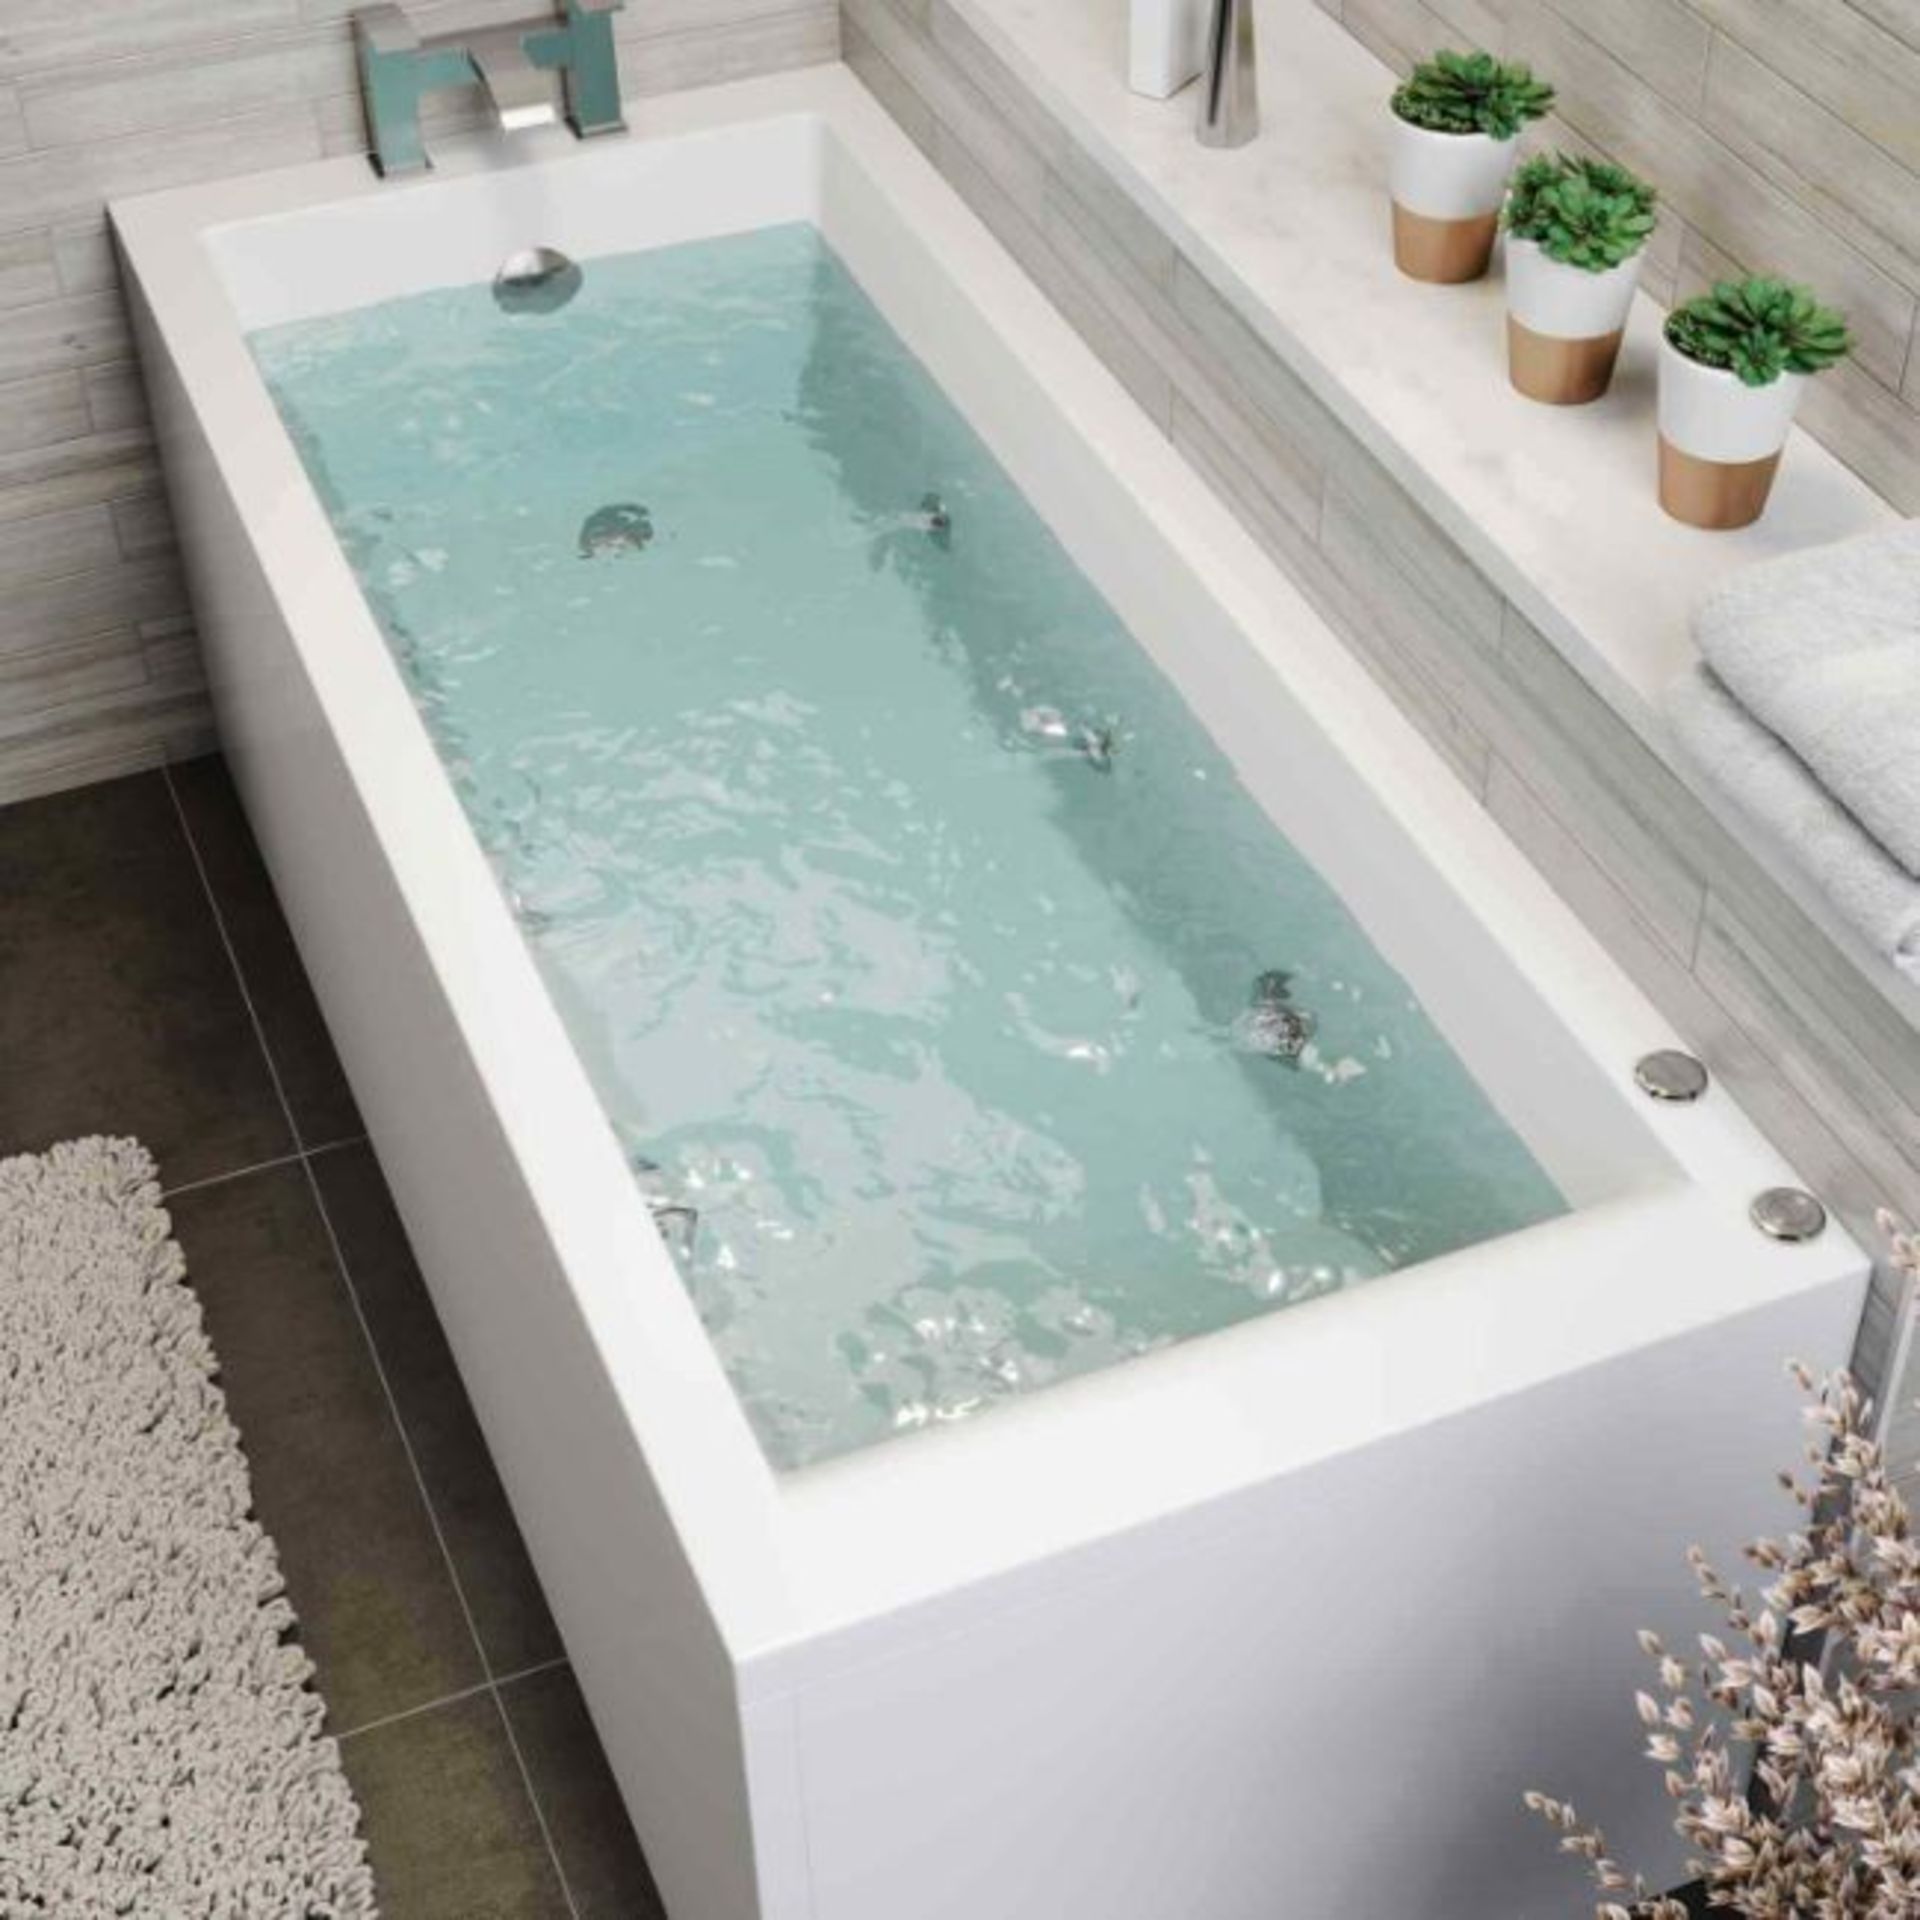 New 1700 x 700 x 545mm Whirlpool Jacuzzi Single-ended Bath - 6 Jets. RRP £1,299.99 - Image 3 of 3